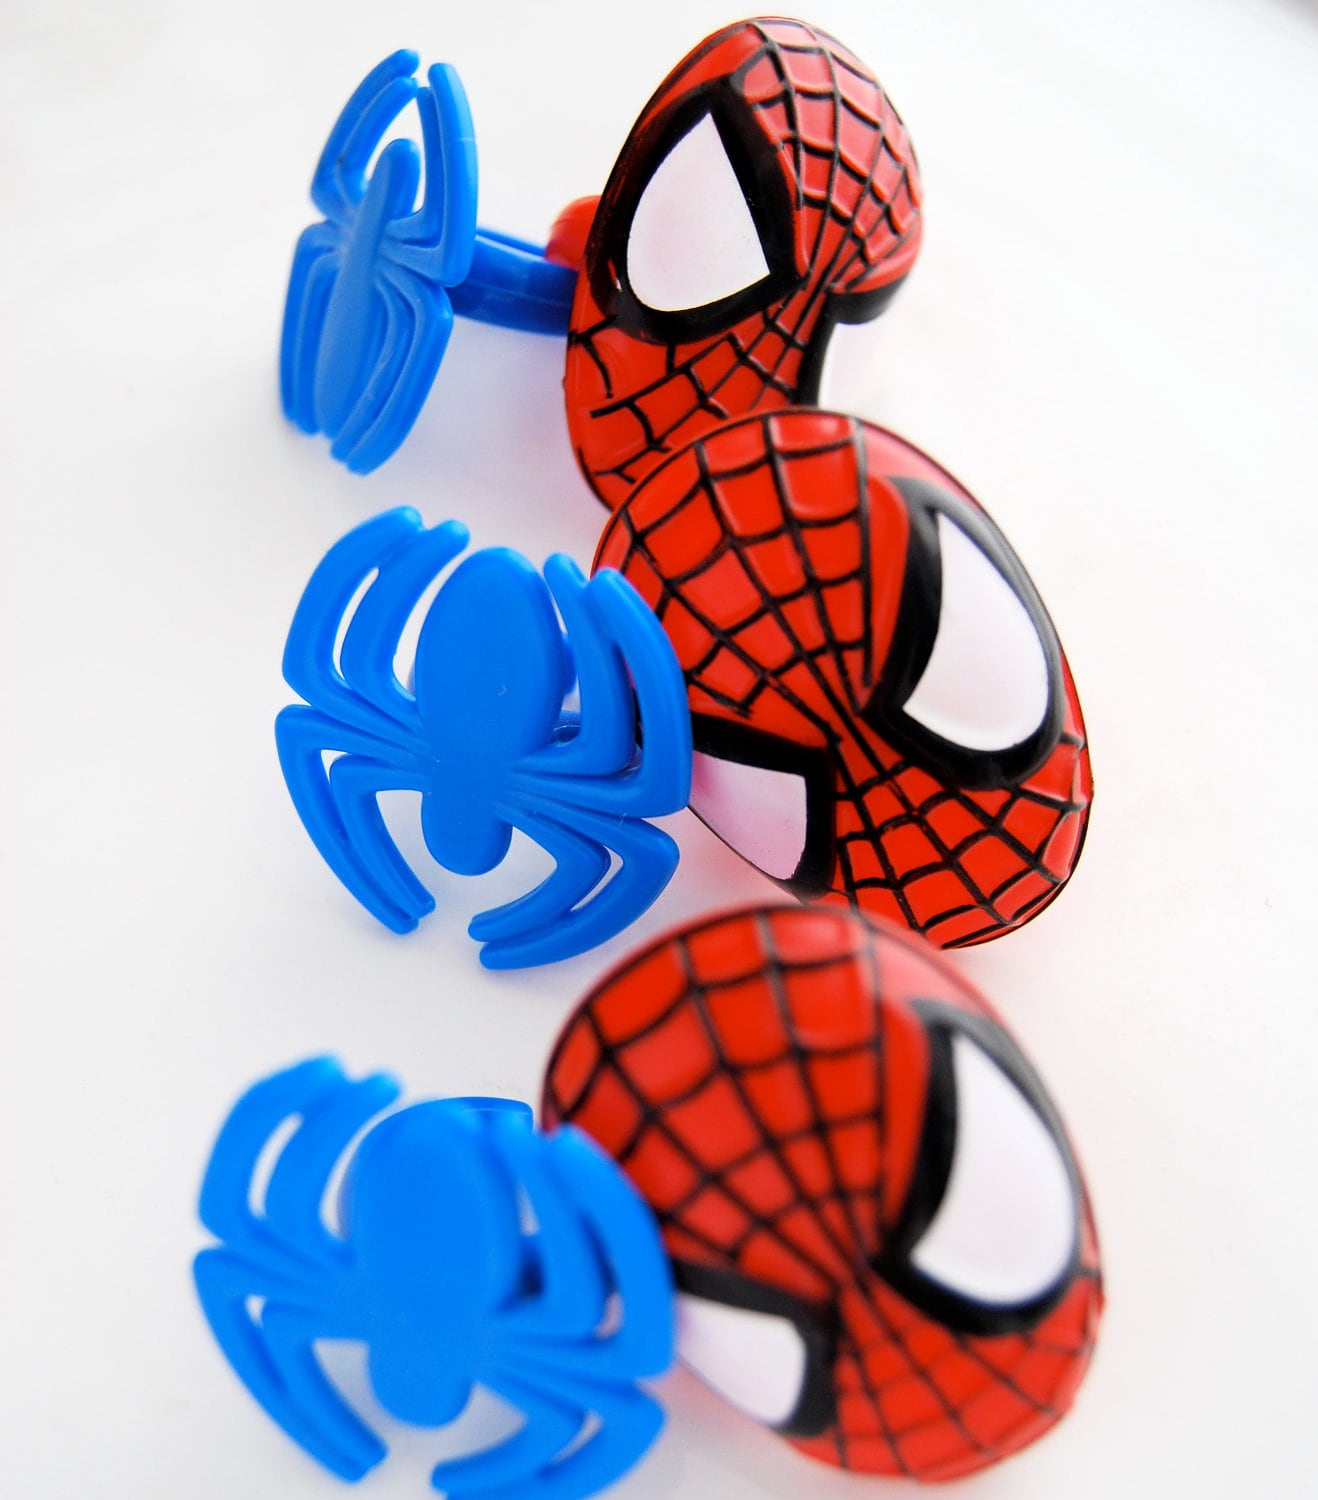 Spiderman and Spider Super Hero Rings or Cupcake by CupcakeSocial